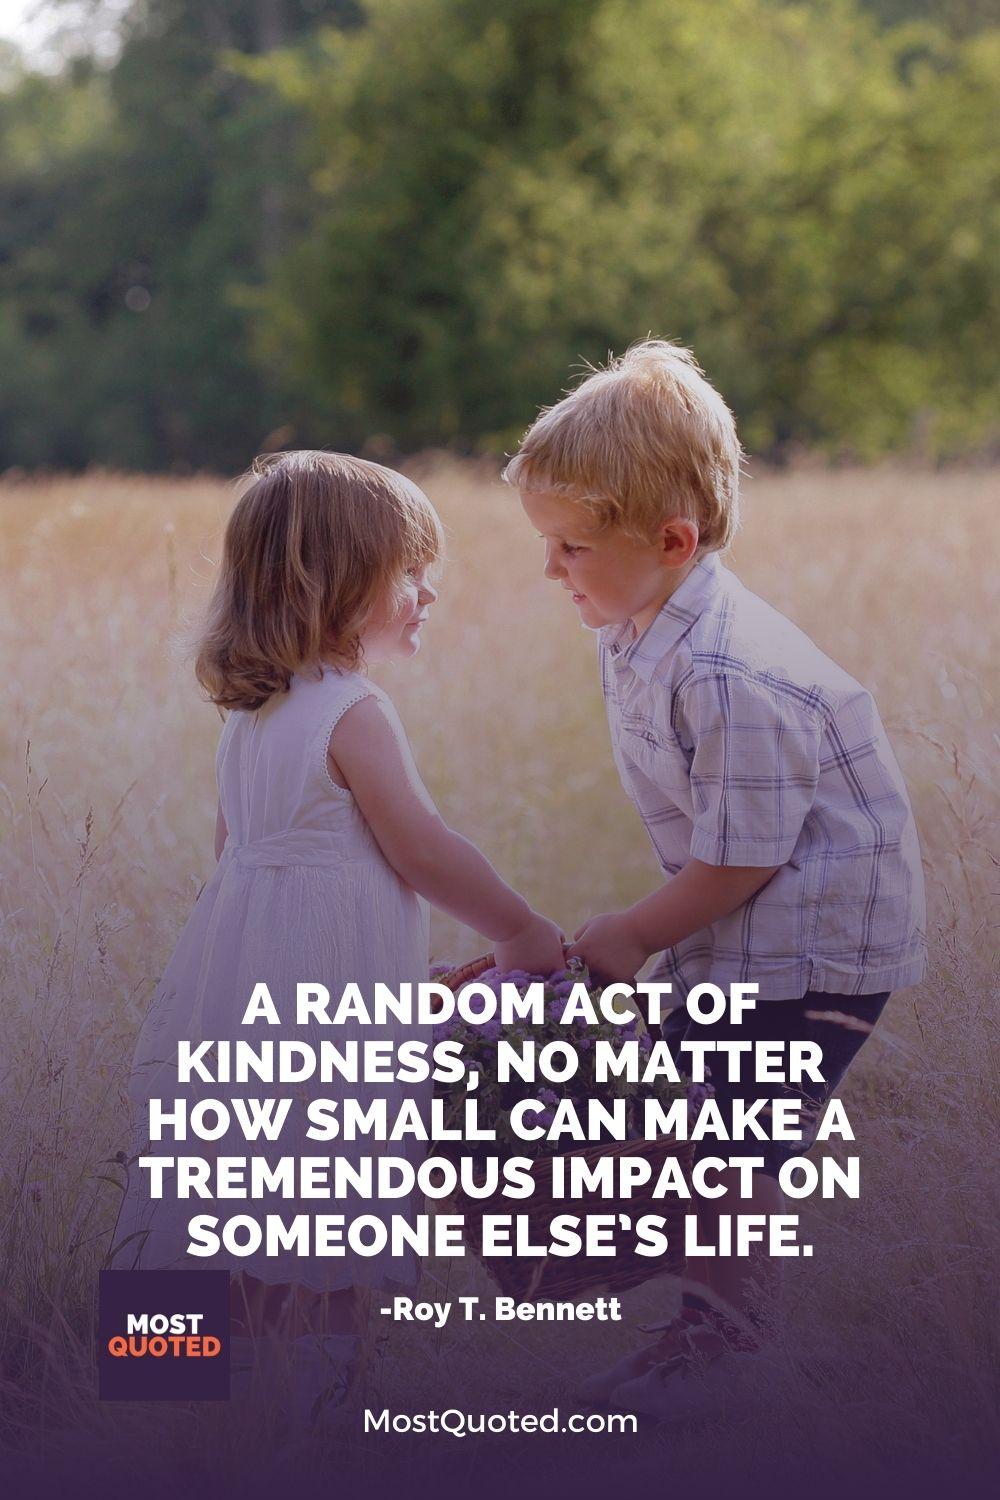 A random act of kindness, no matter how small can make a tremendous impact on someone else’s life. - Roy T. Bennett